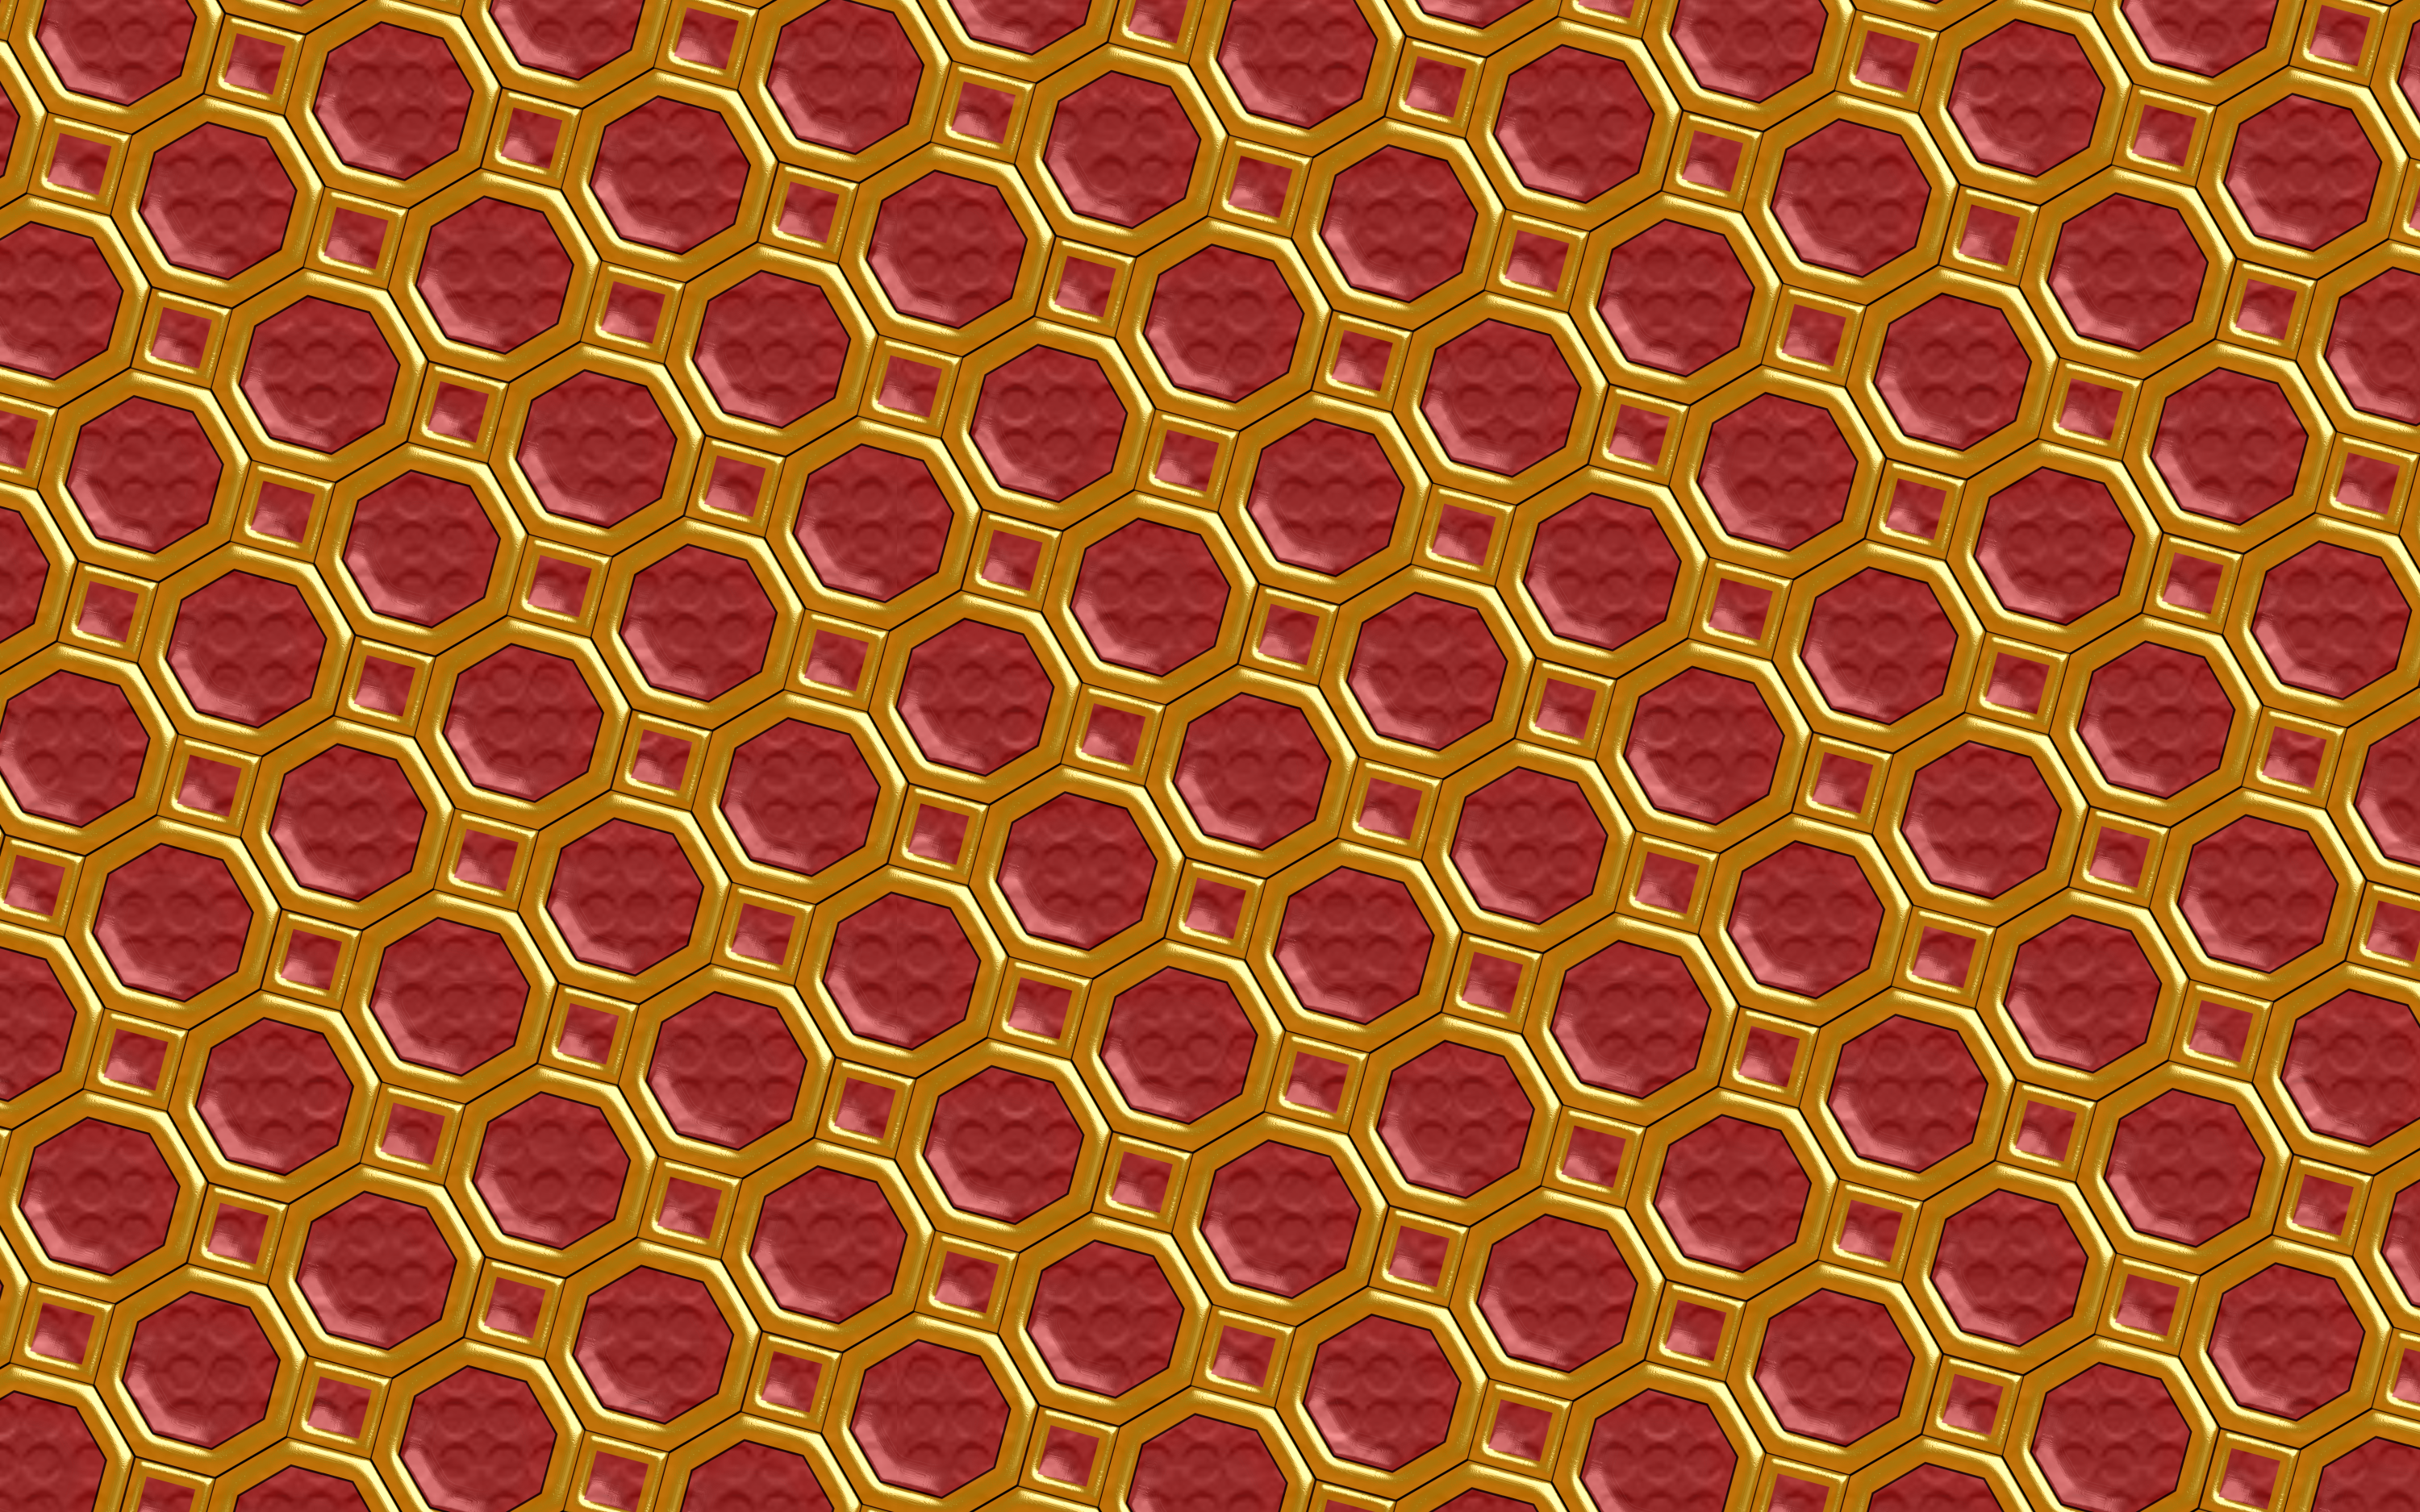 Transparent Gold Octagons Overlay With Red Texture by l4k3 on DeviantArt